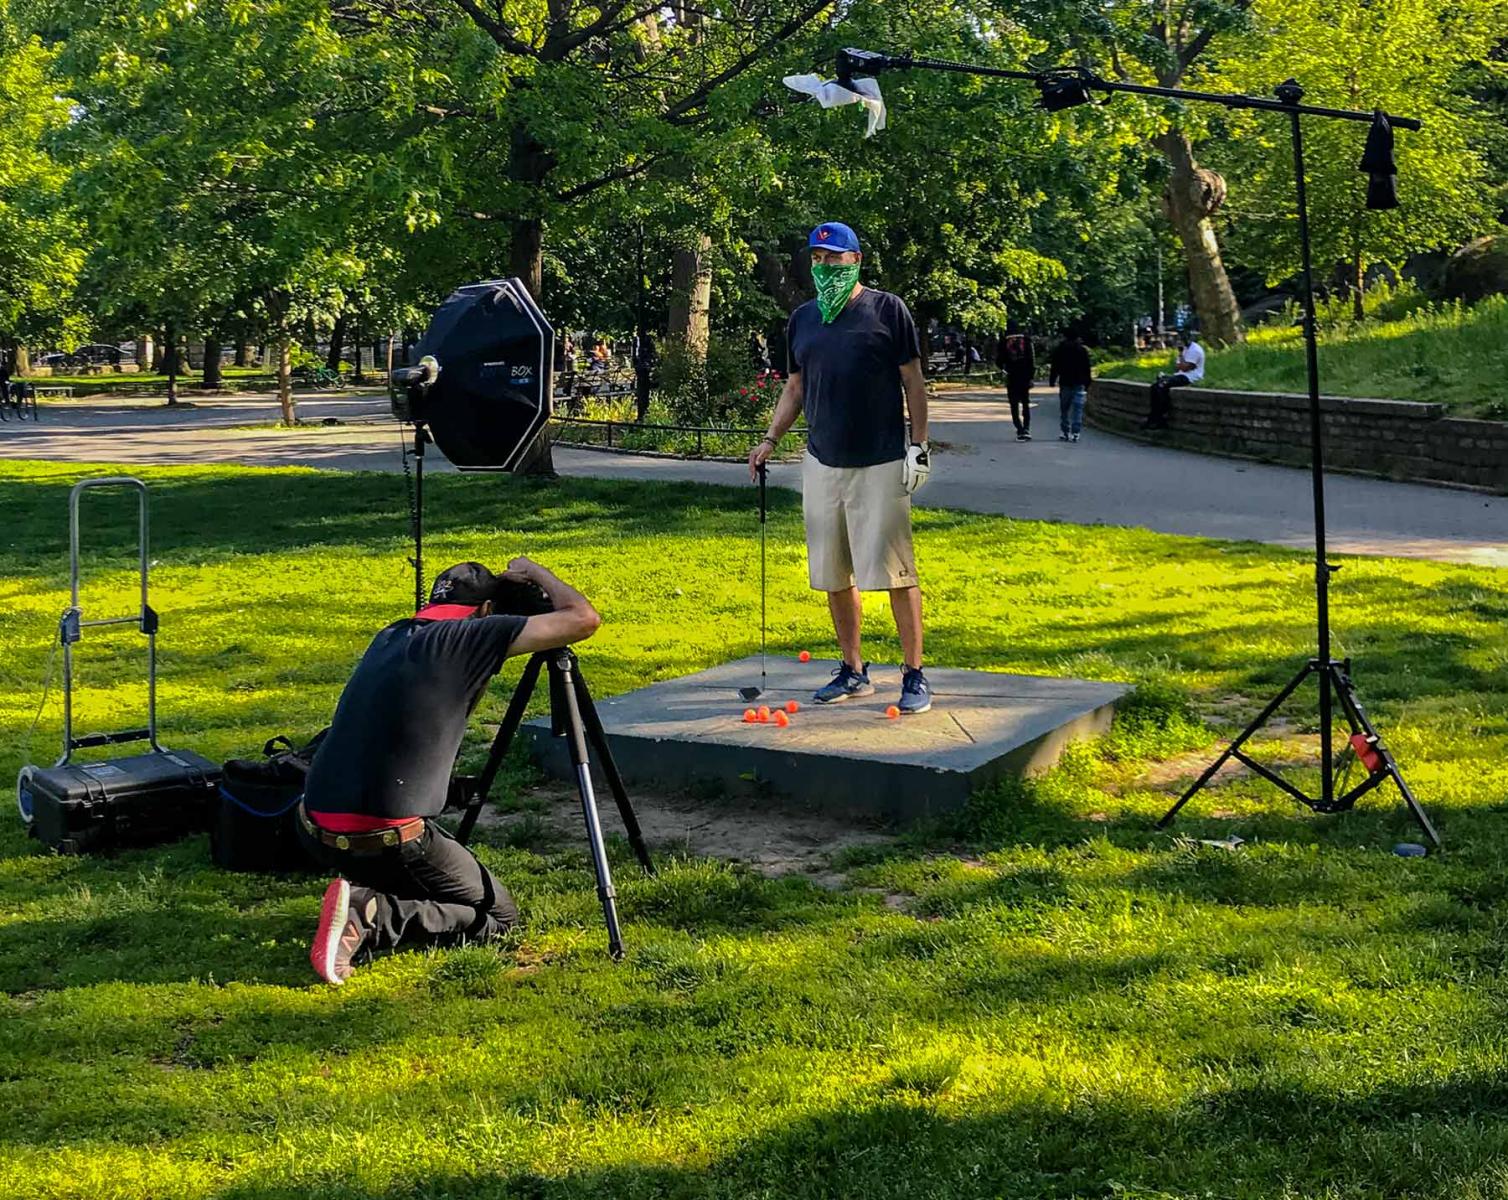 photographing Dane's portrait in Marcus Garvey Park - Harlem - NYC.   : Lock Down Park Portraits : New York City based photographer and video specializing in portrait corporate portraits, video, editorial stories for on location and architectural photography